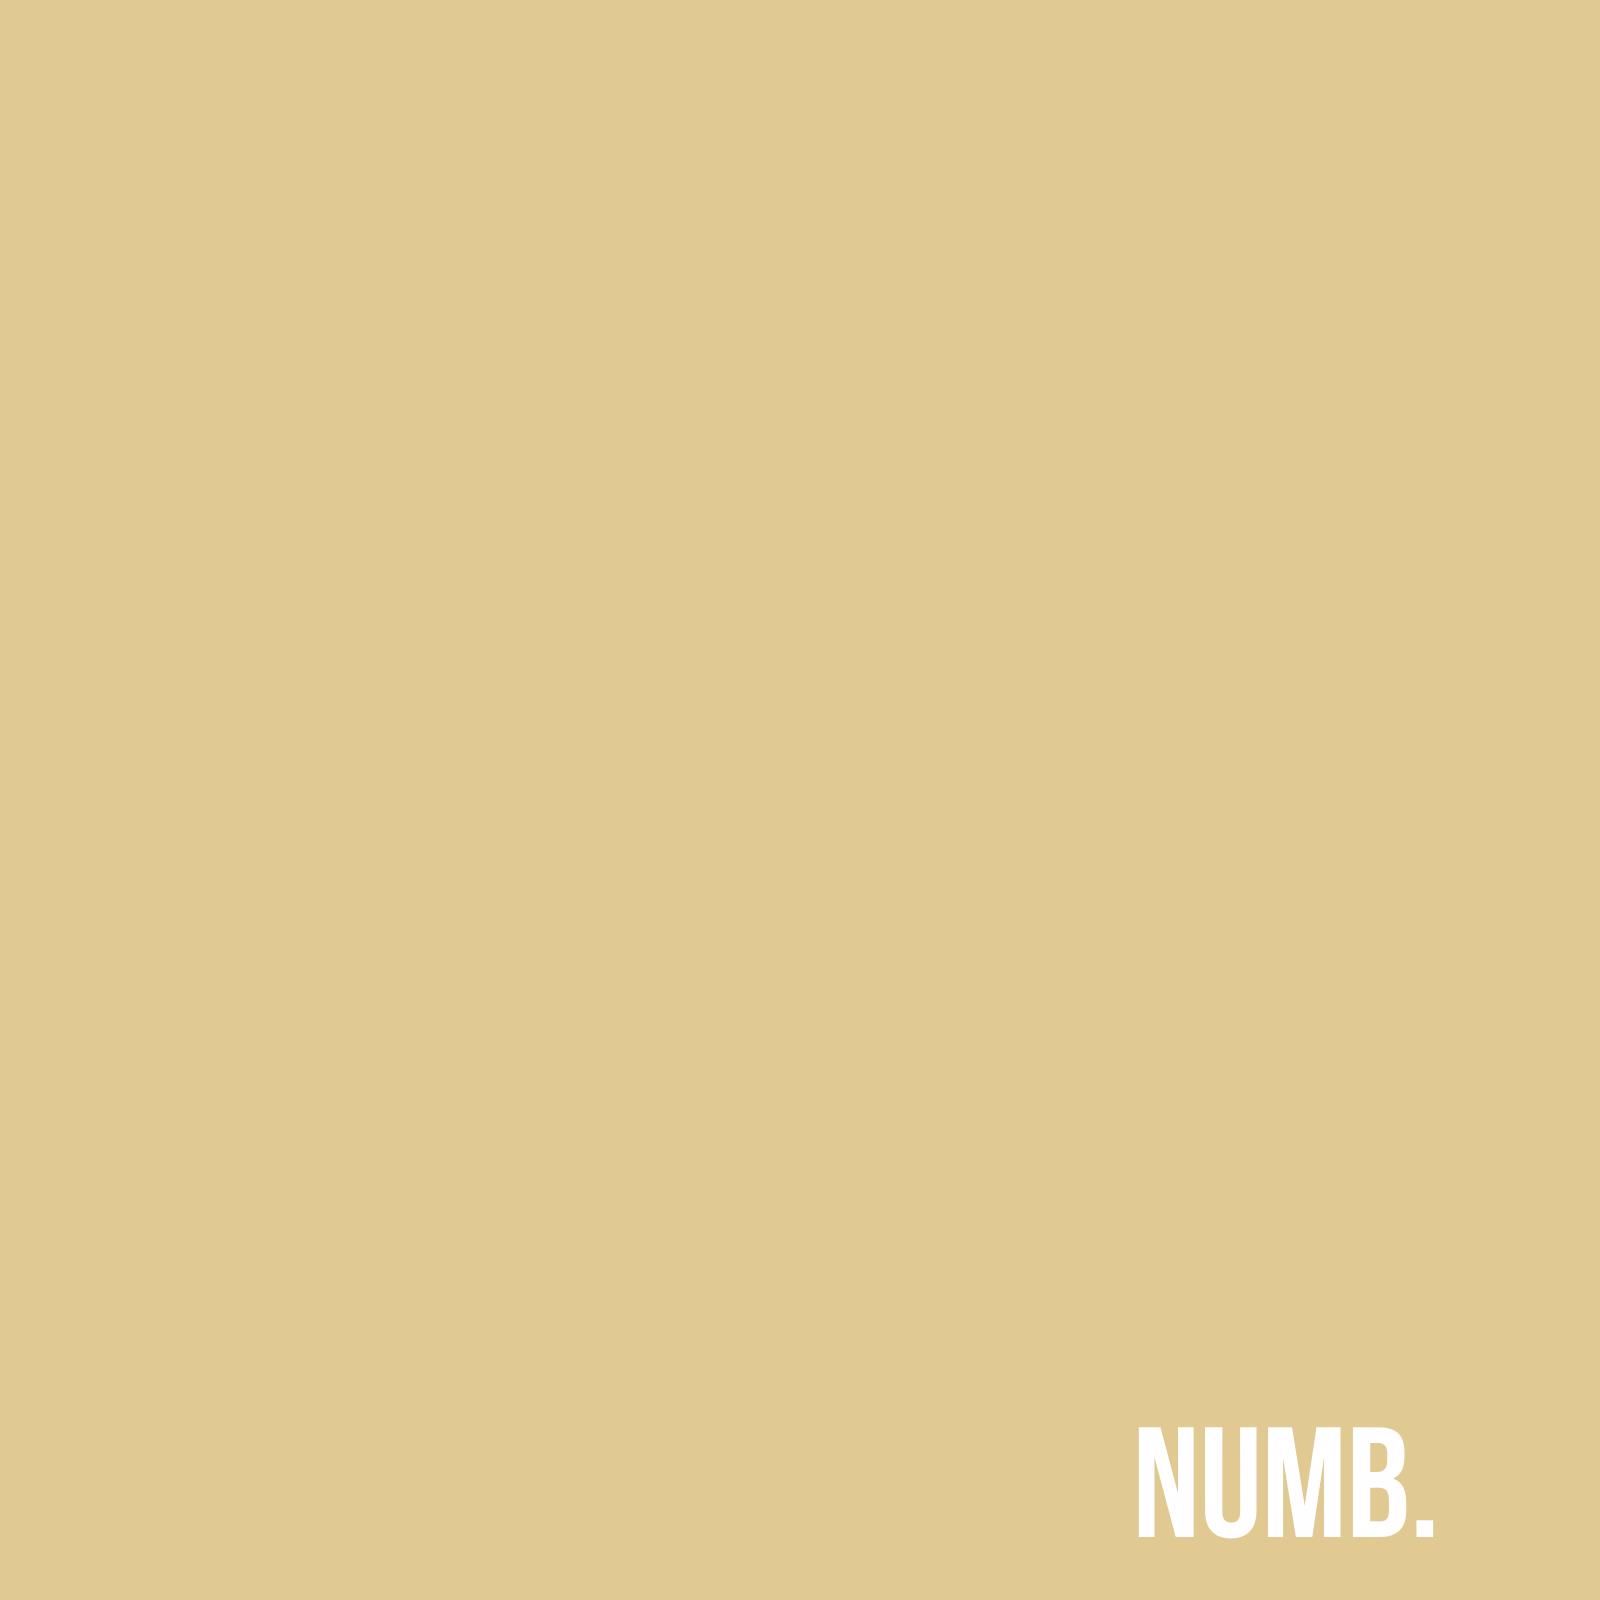 Budata numb [prod. by aftertheparty]